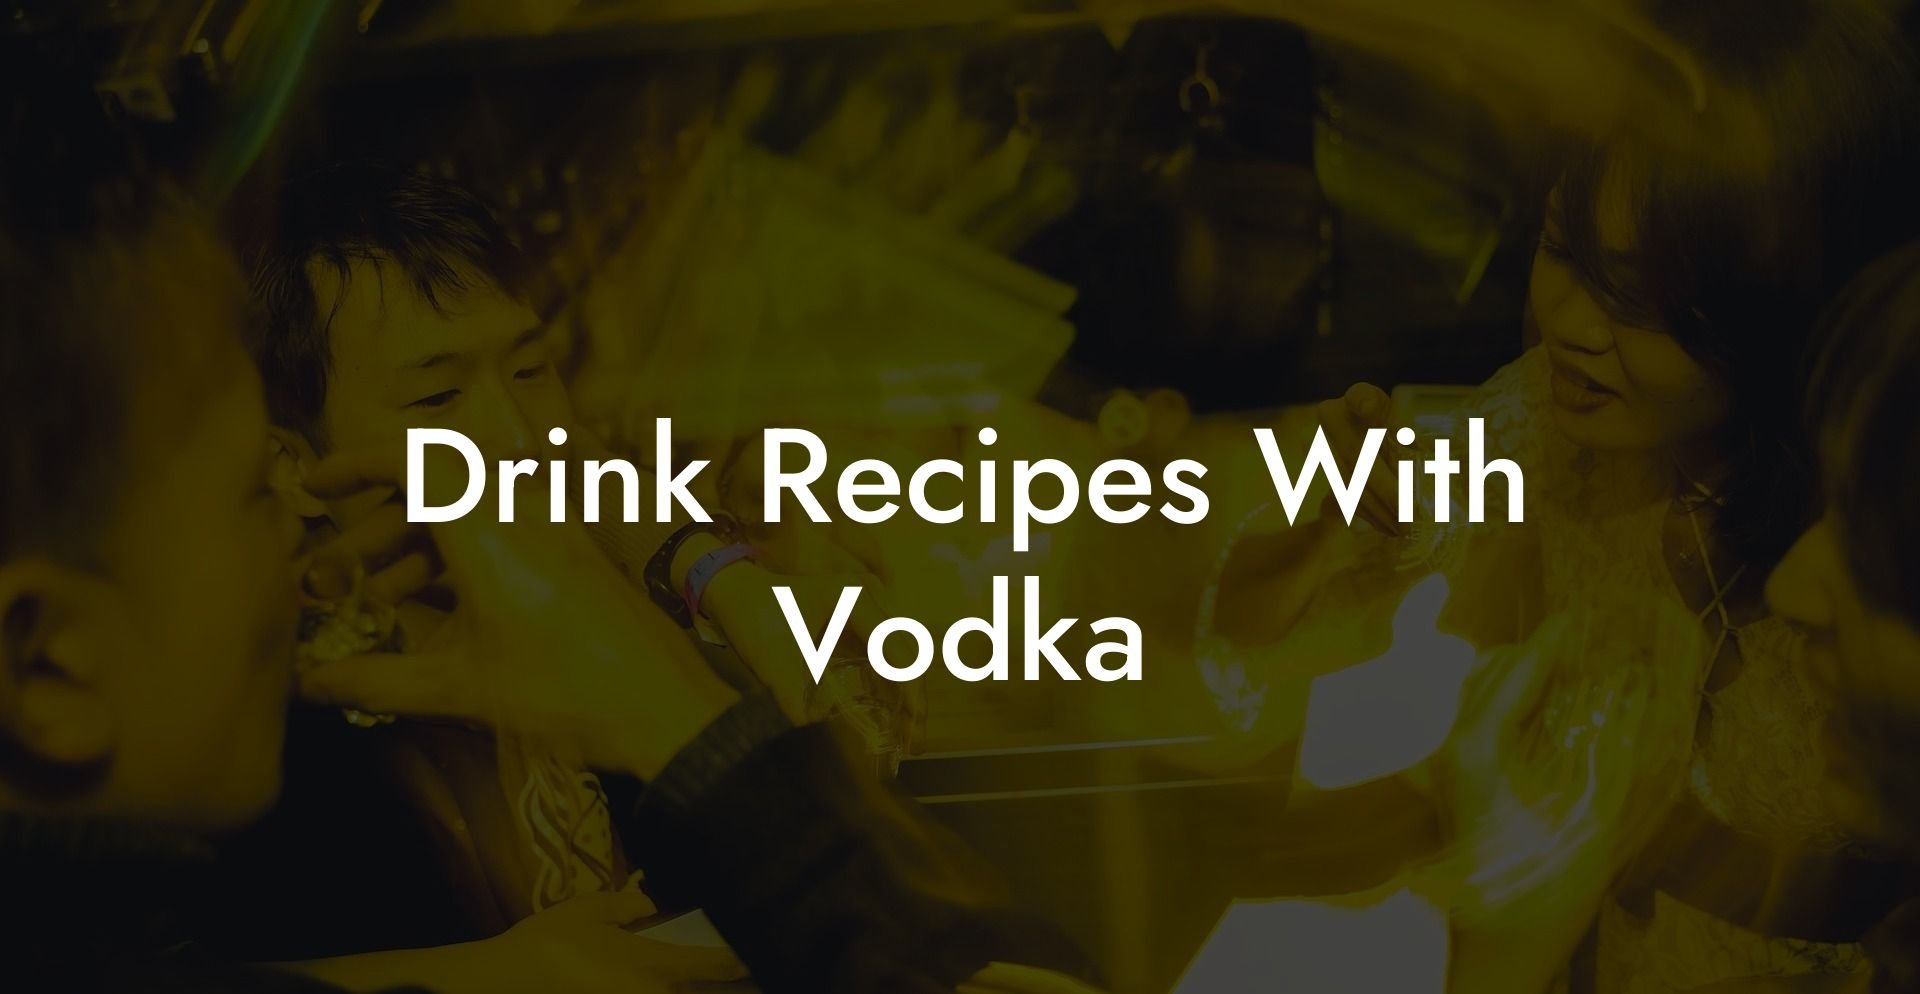 Drink Recipes With Vodka